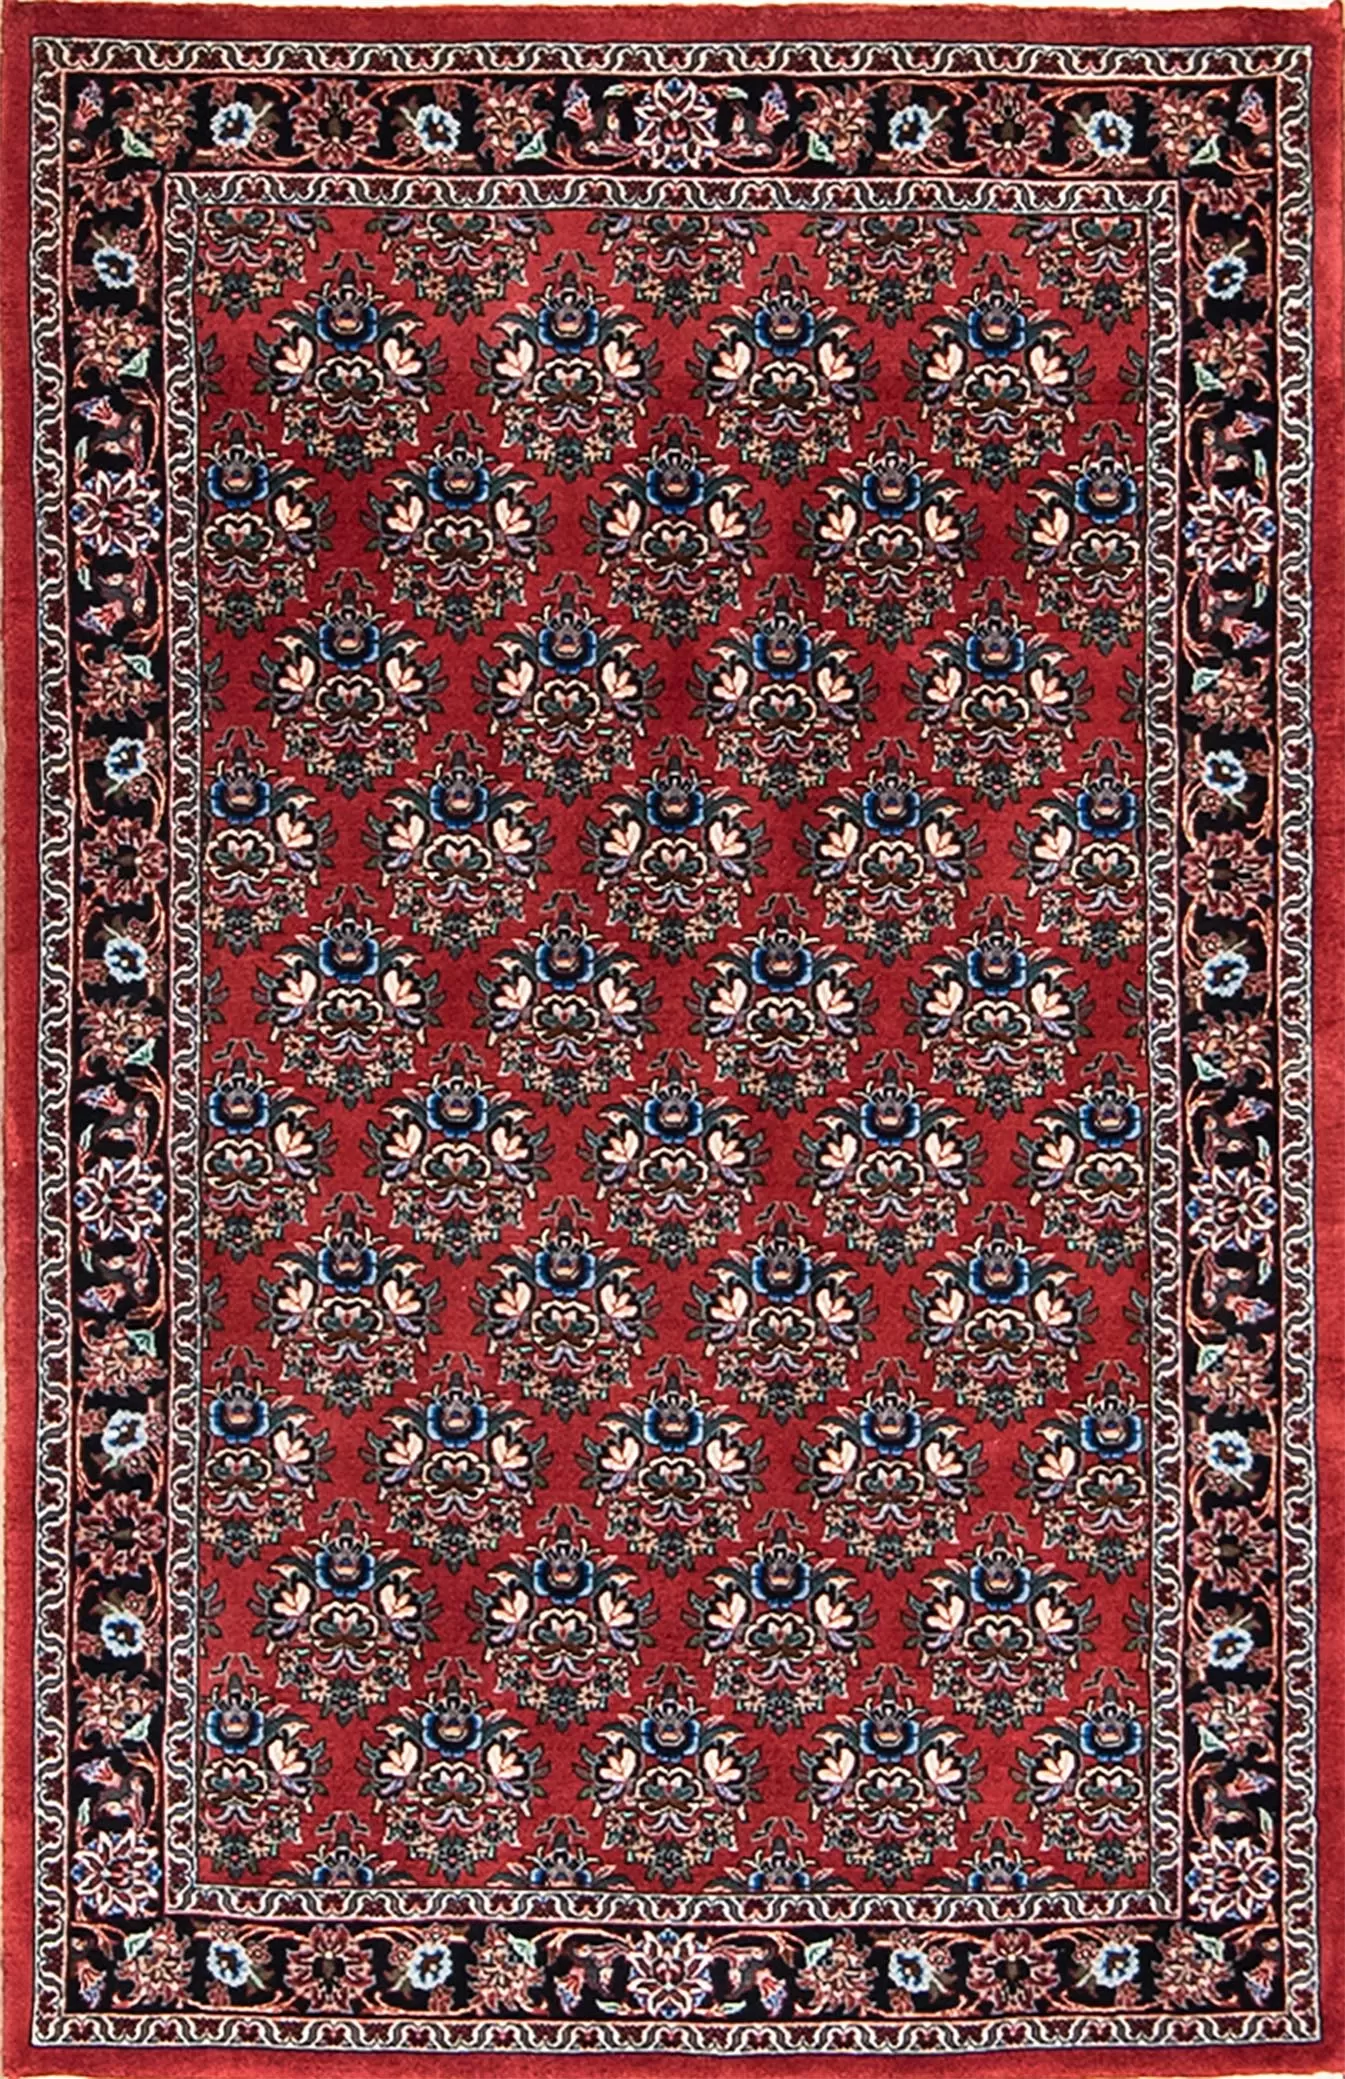 Heavy quality hand woven floral Persian Bijar rug in mauve color. Rug size 3.1x5.